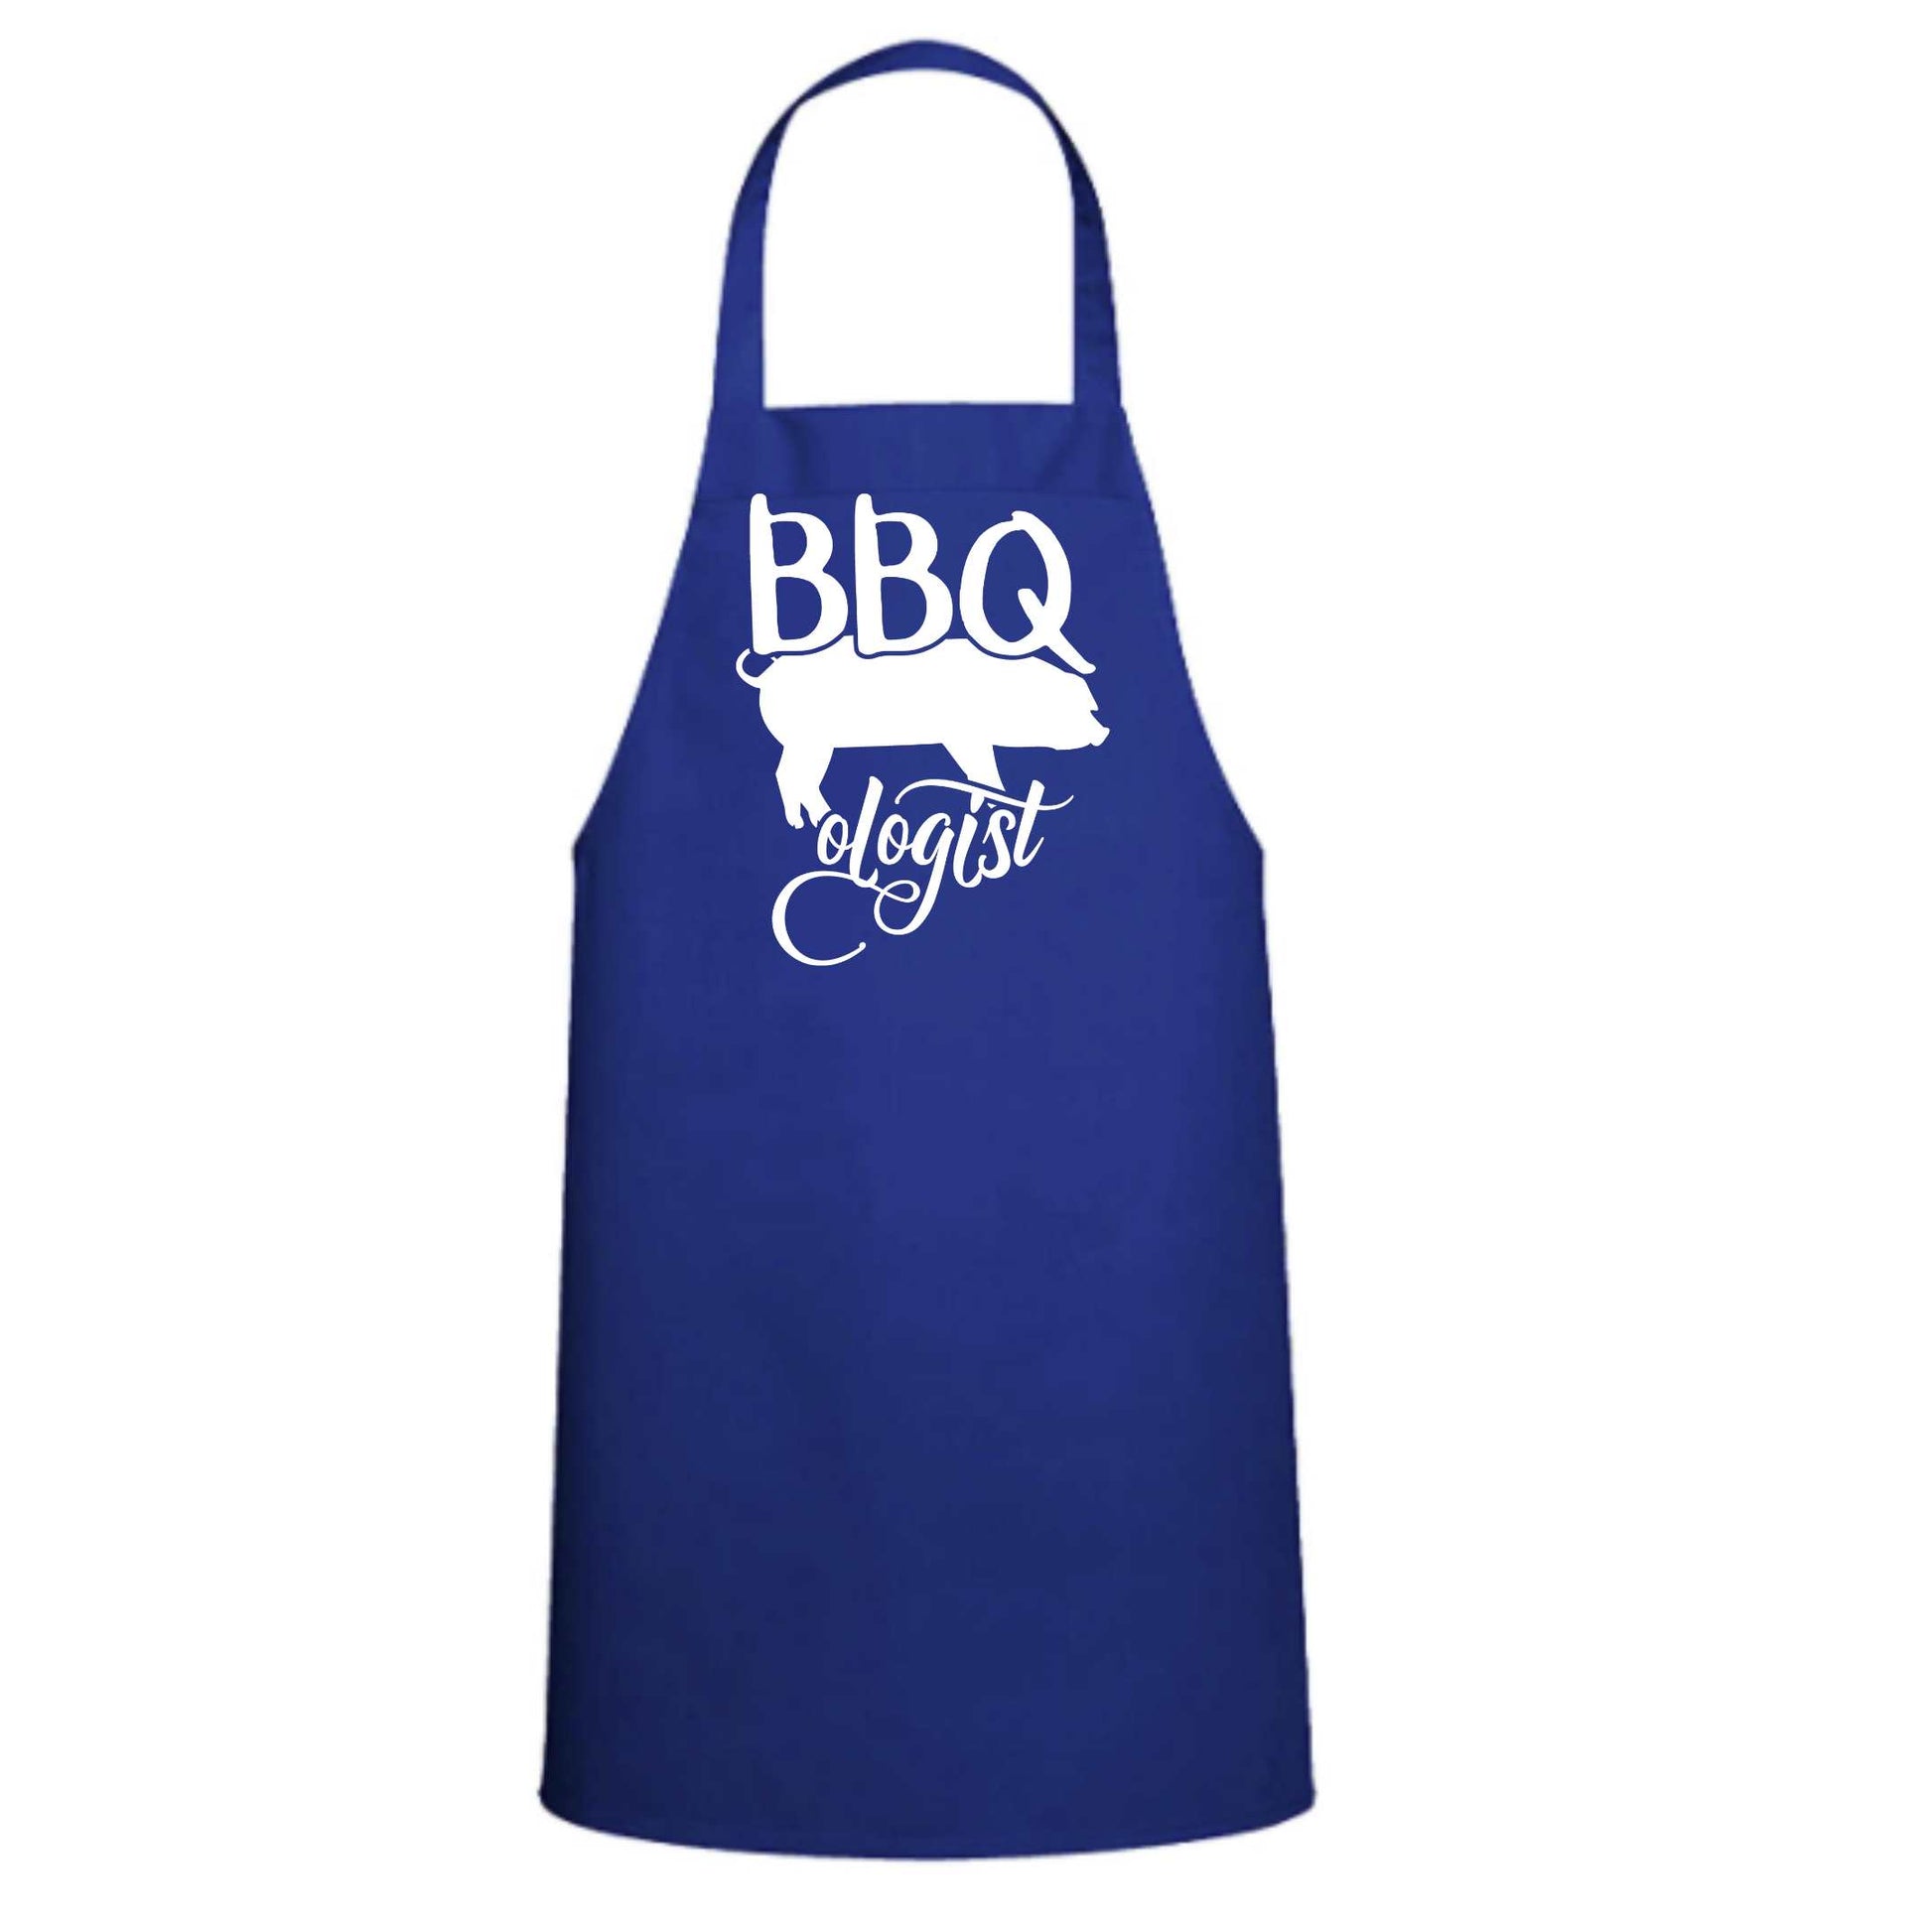 BBQ ologist - Great Gift - Commercial Grade - Mister Snarky's